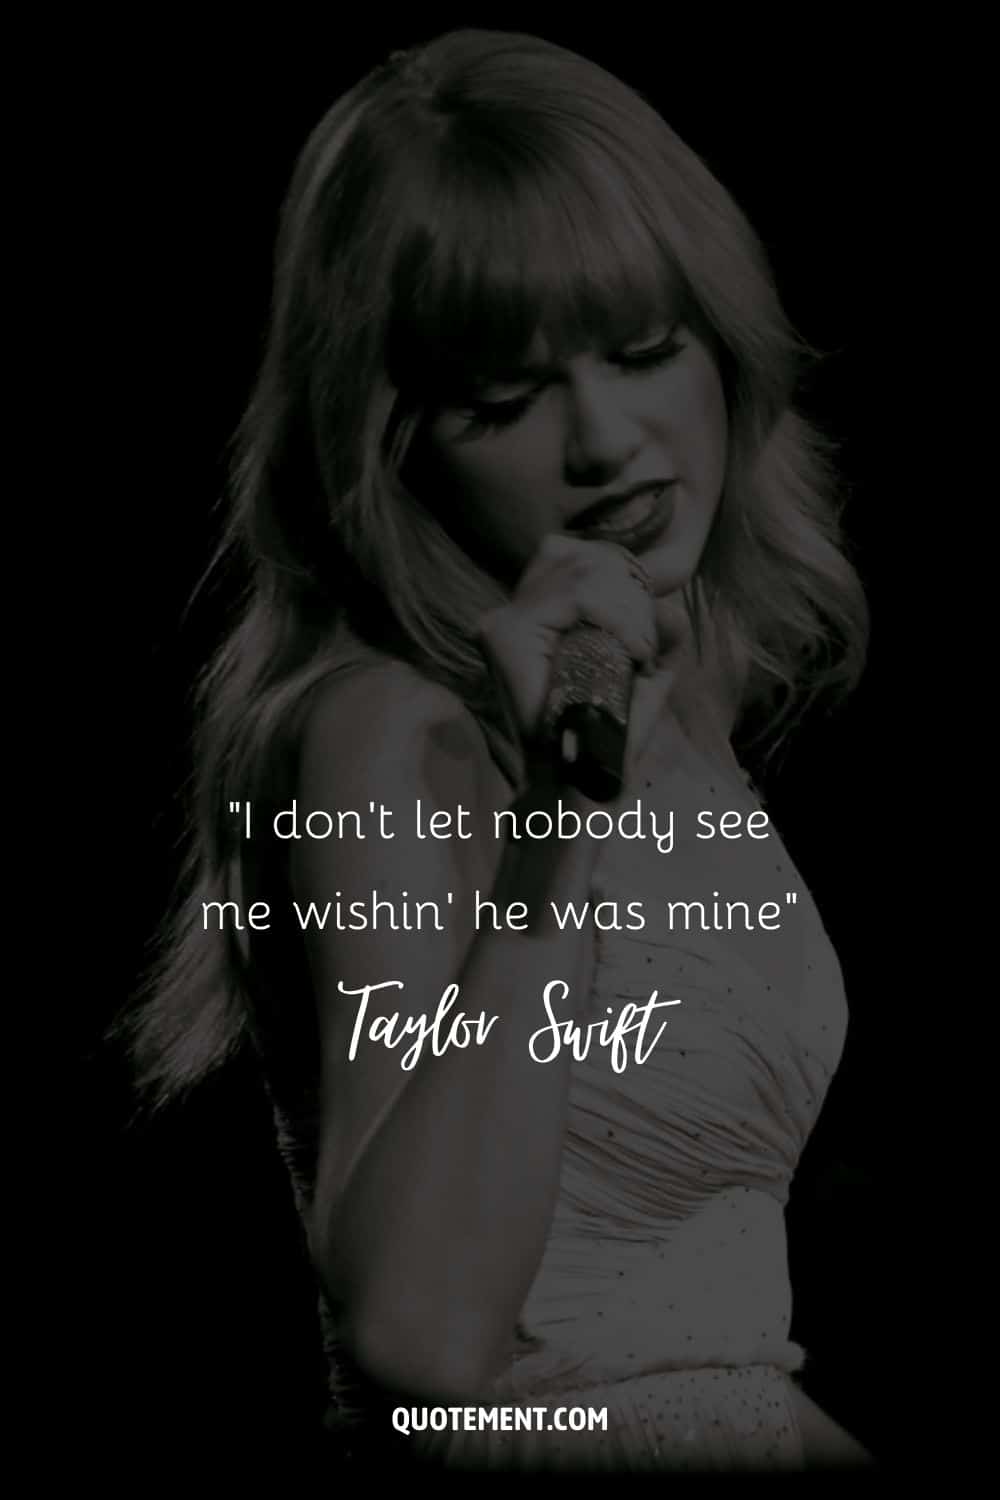 “I don't let nobody see me wishin' he was mine” ― Taylor Swift